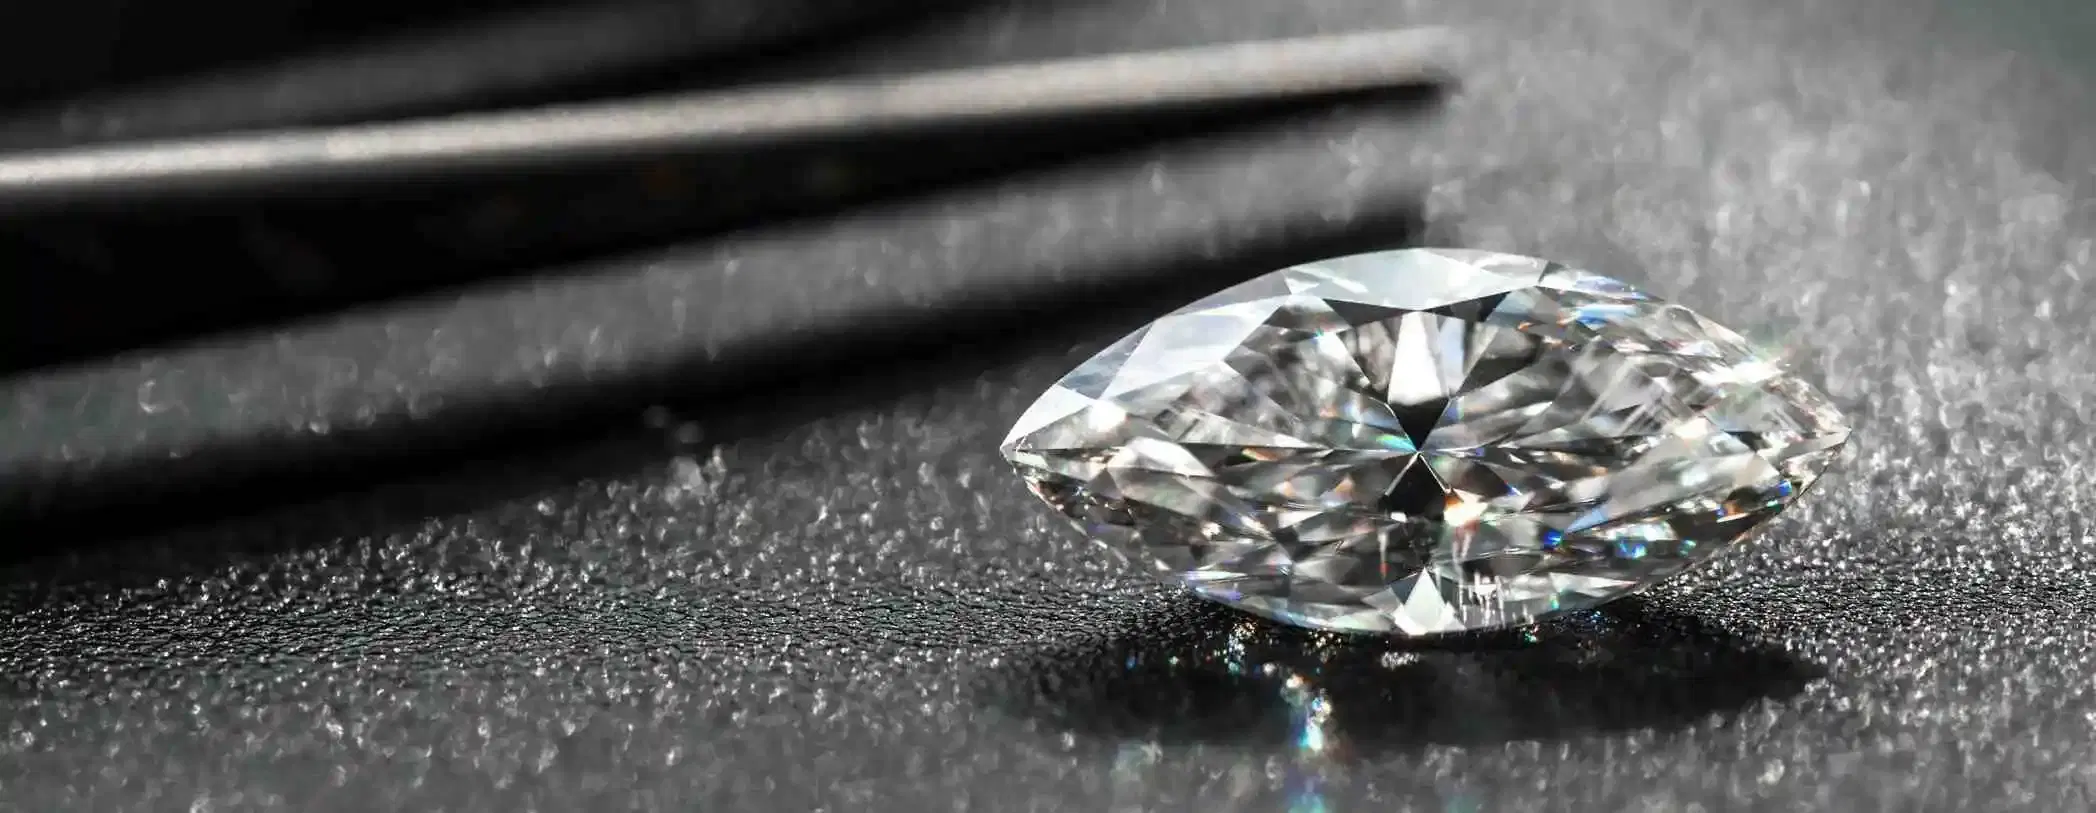 Marquise Cut Diamonds: Ideal Proportions & L/W Ratio Guide